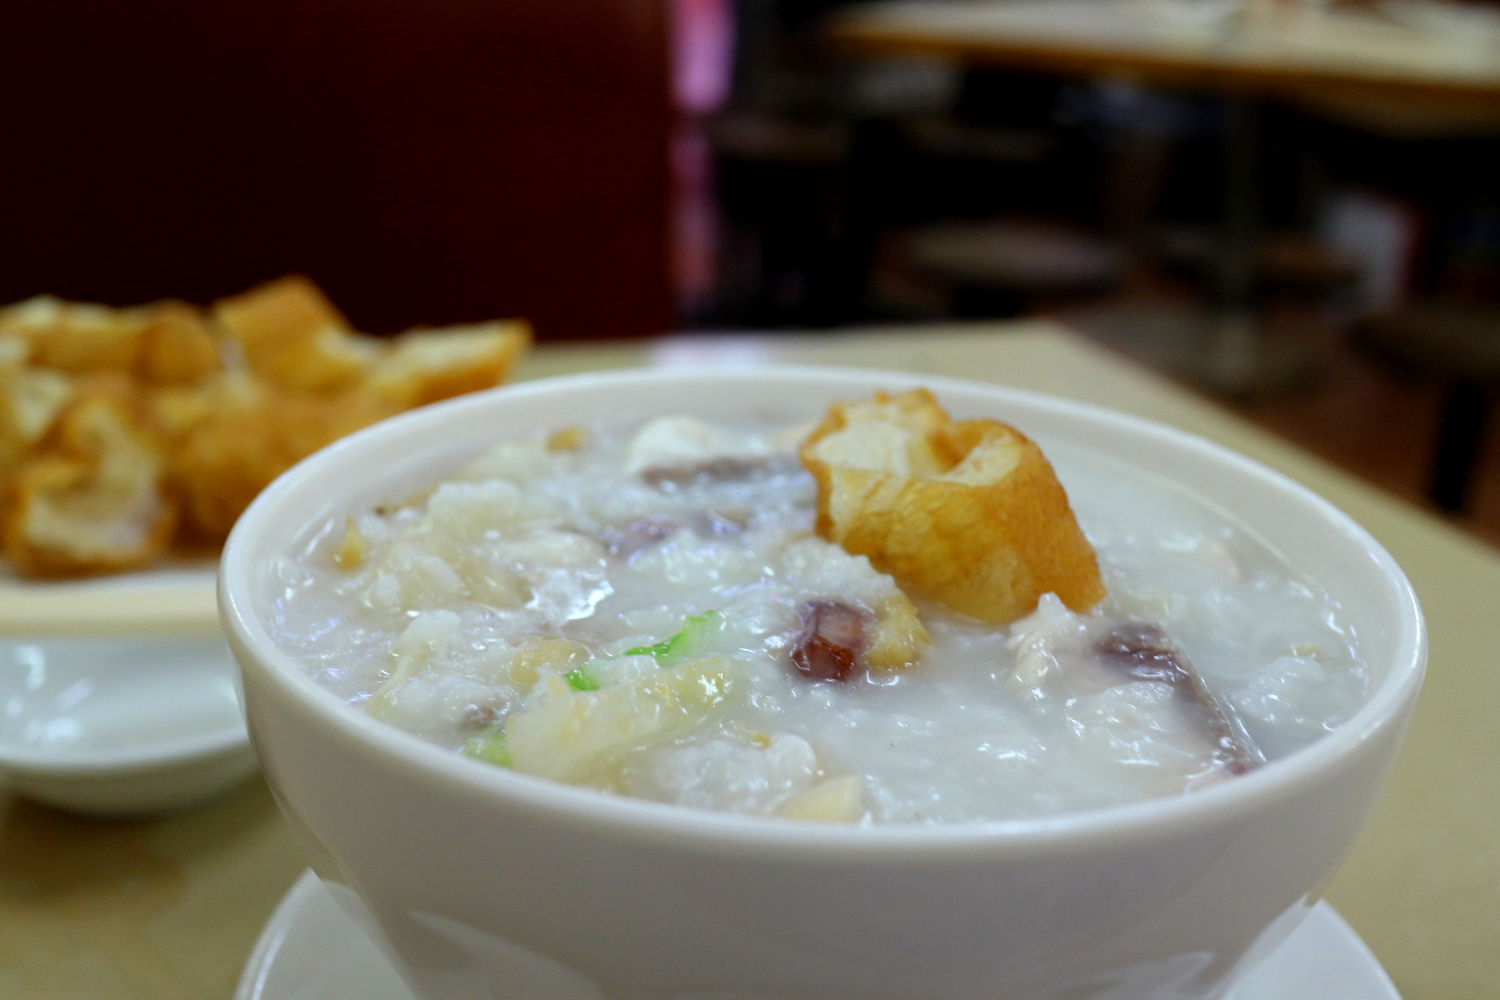 'Fisherfolk' congee with seafood and peanuts, and a side of Chinese crullers. Image by Piera Chen / londoninfopage